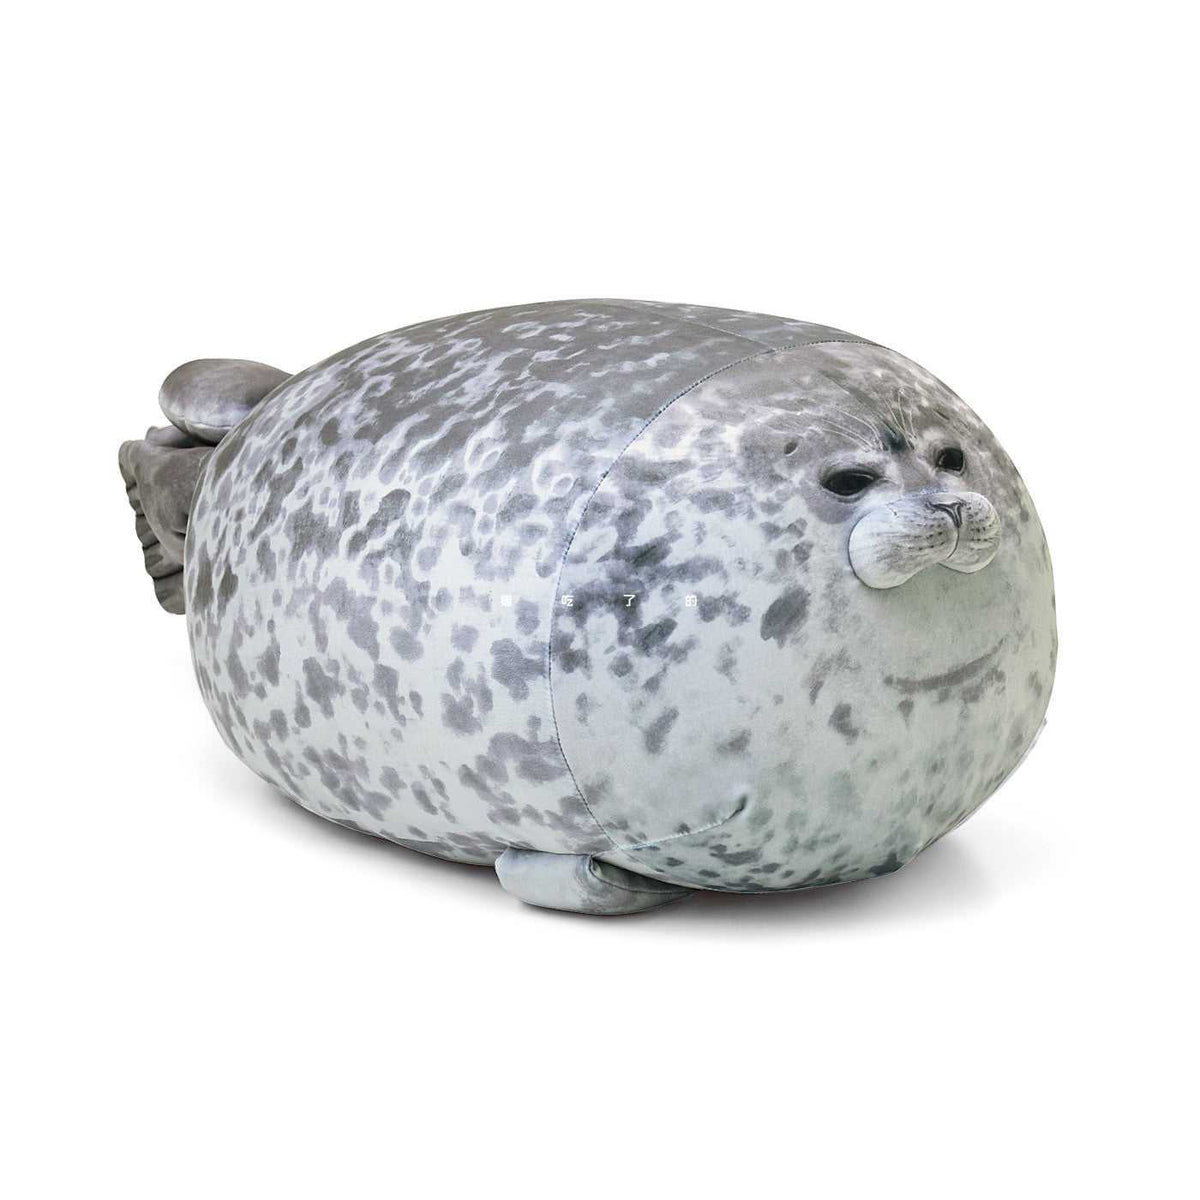 Cute Seal Pillow Realistic Cotton Stuffed Animal Plush Toy Ocean Plushies Animal Hugging Pillow Cushion,31.5 inches